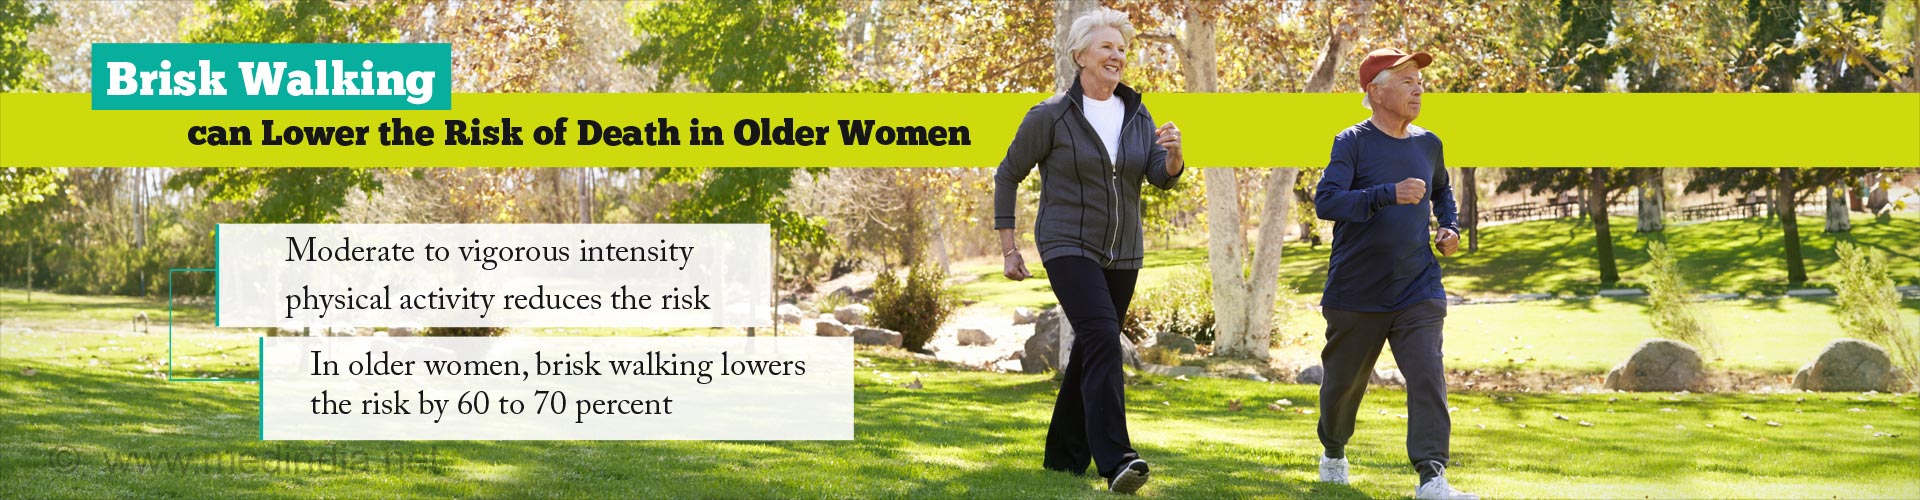 Brisk walking can lower the risk of death in older women
- Moderate to vigorous intensity physical activity reduces the risk
- In older women. brisk walking lowers the risk by 60 to 70 percent